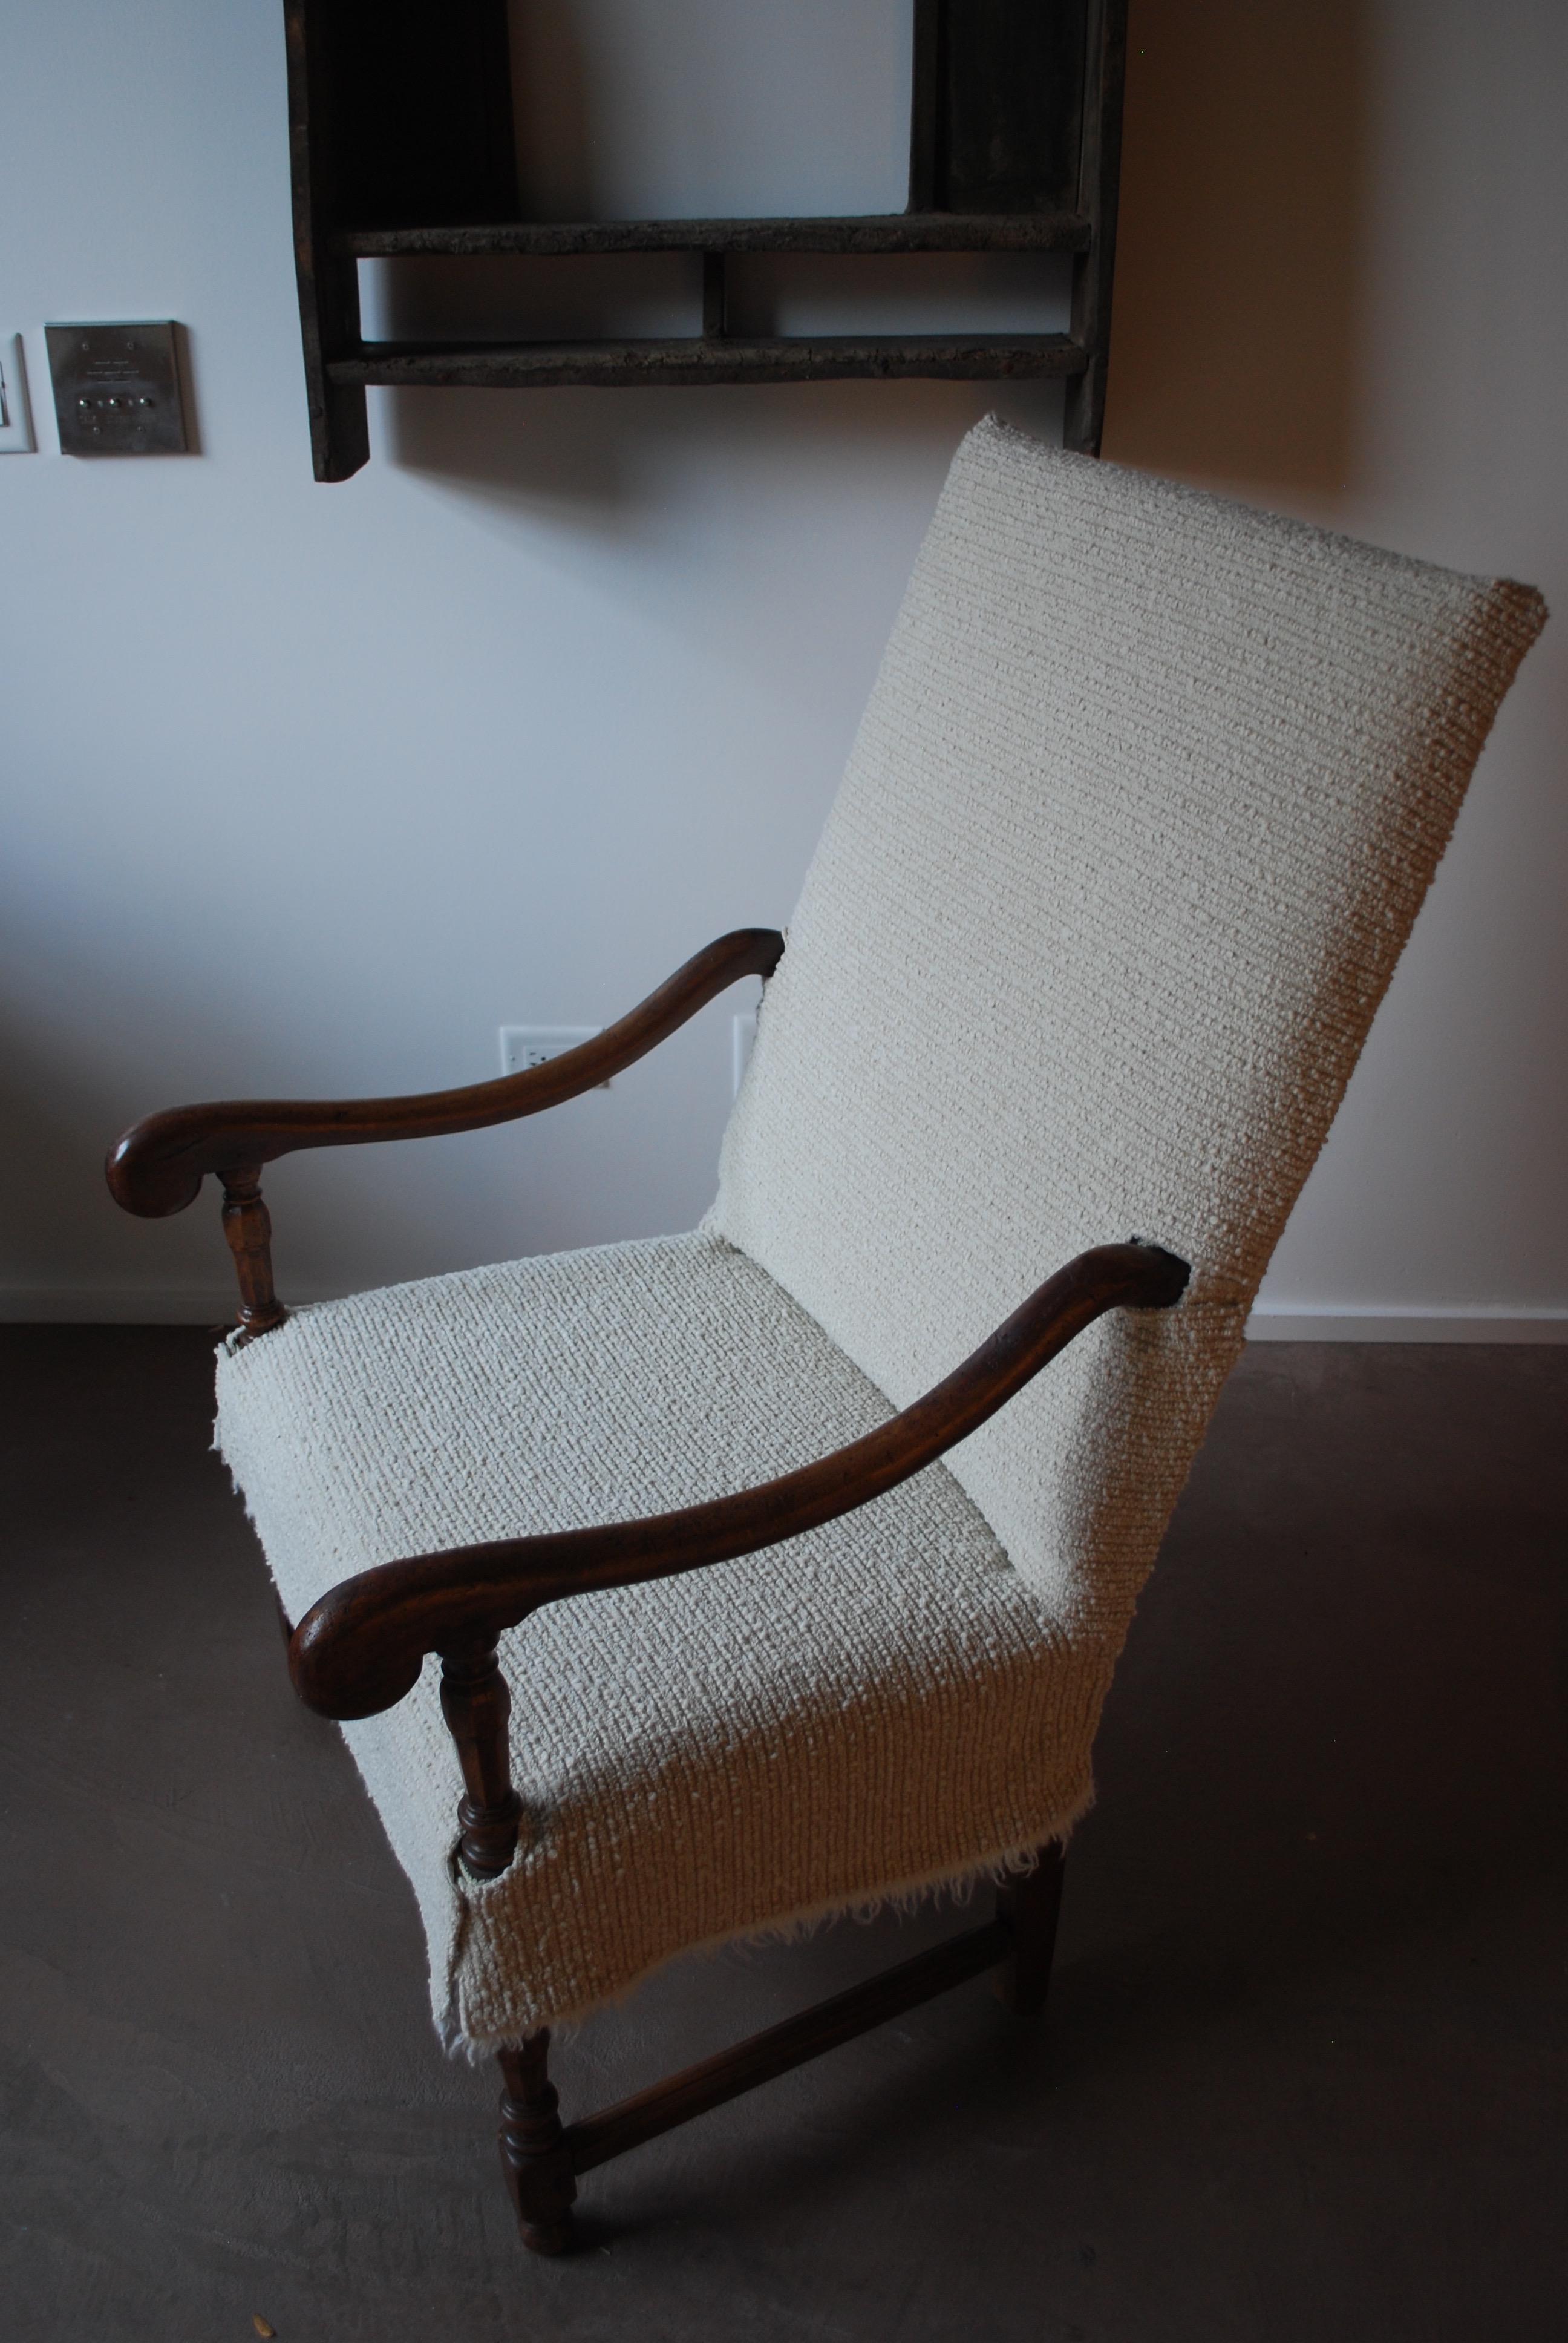 19th century French walnut Fauteuil armchair 
Upholstered in textured linen and slip covered in heavily textural wool.